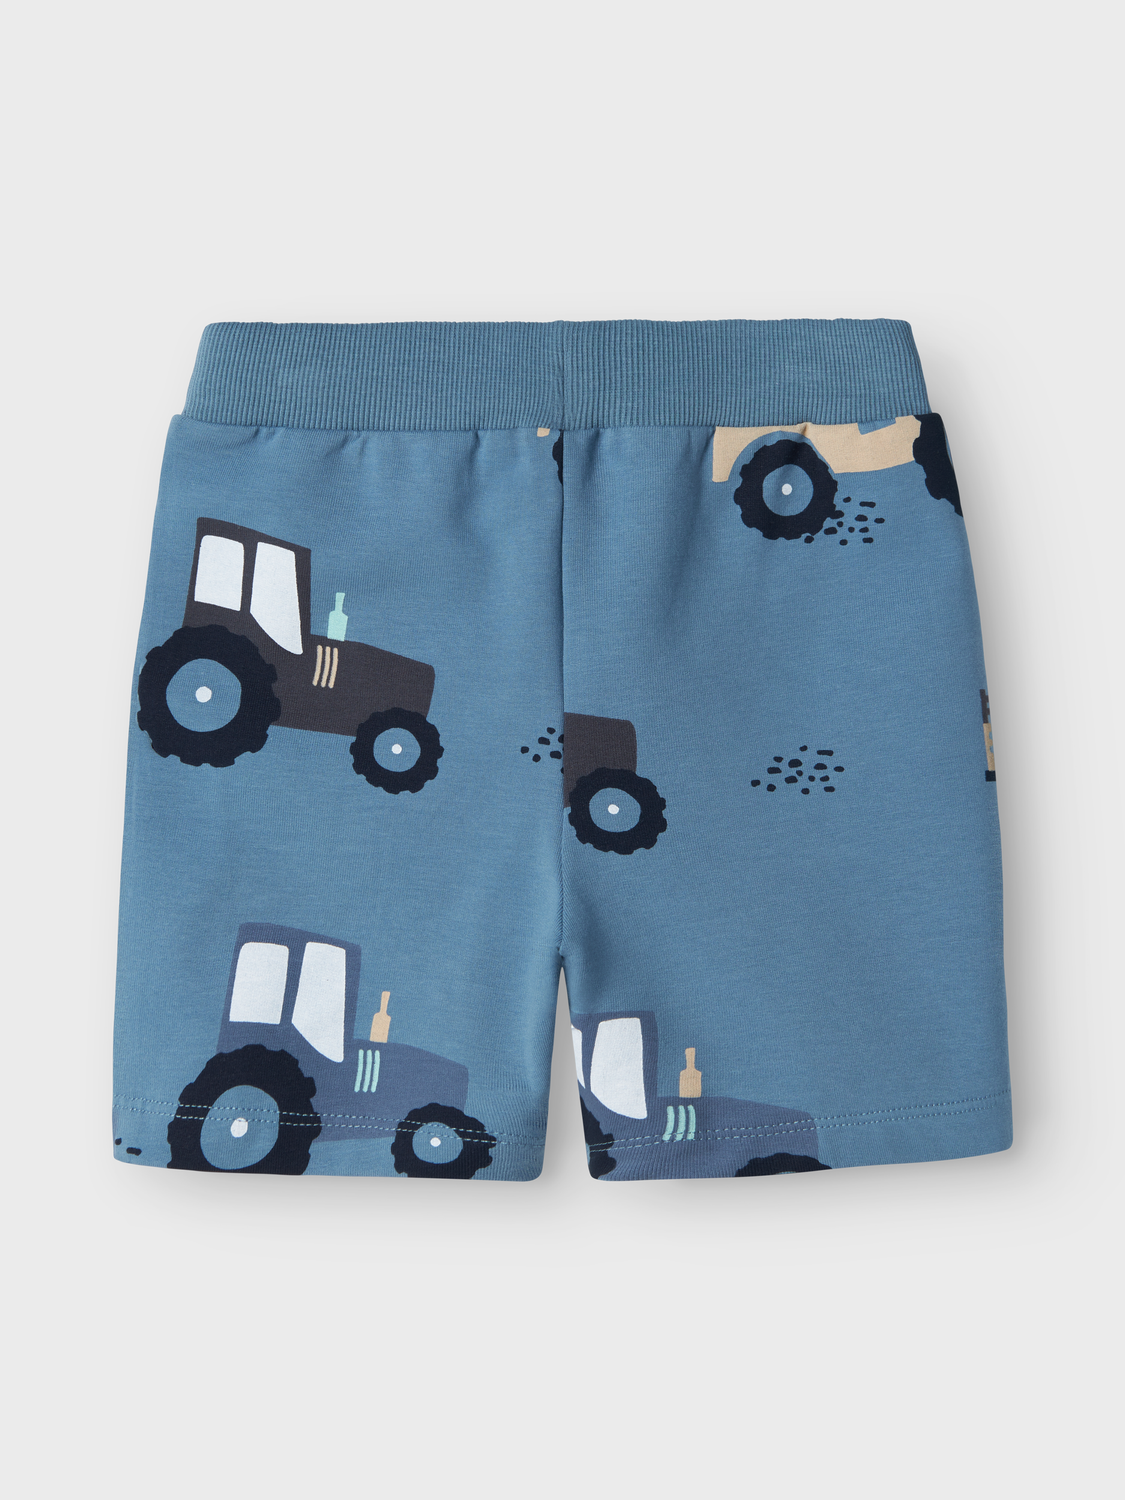 Tractor Shorts and T-Shirt - Blue